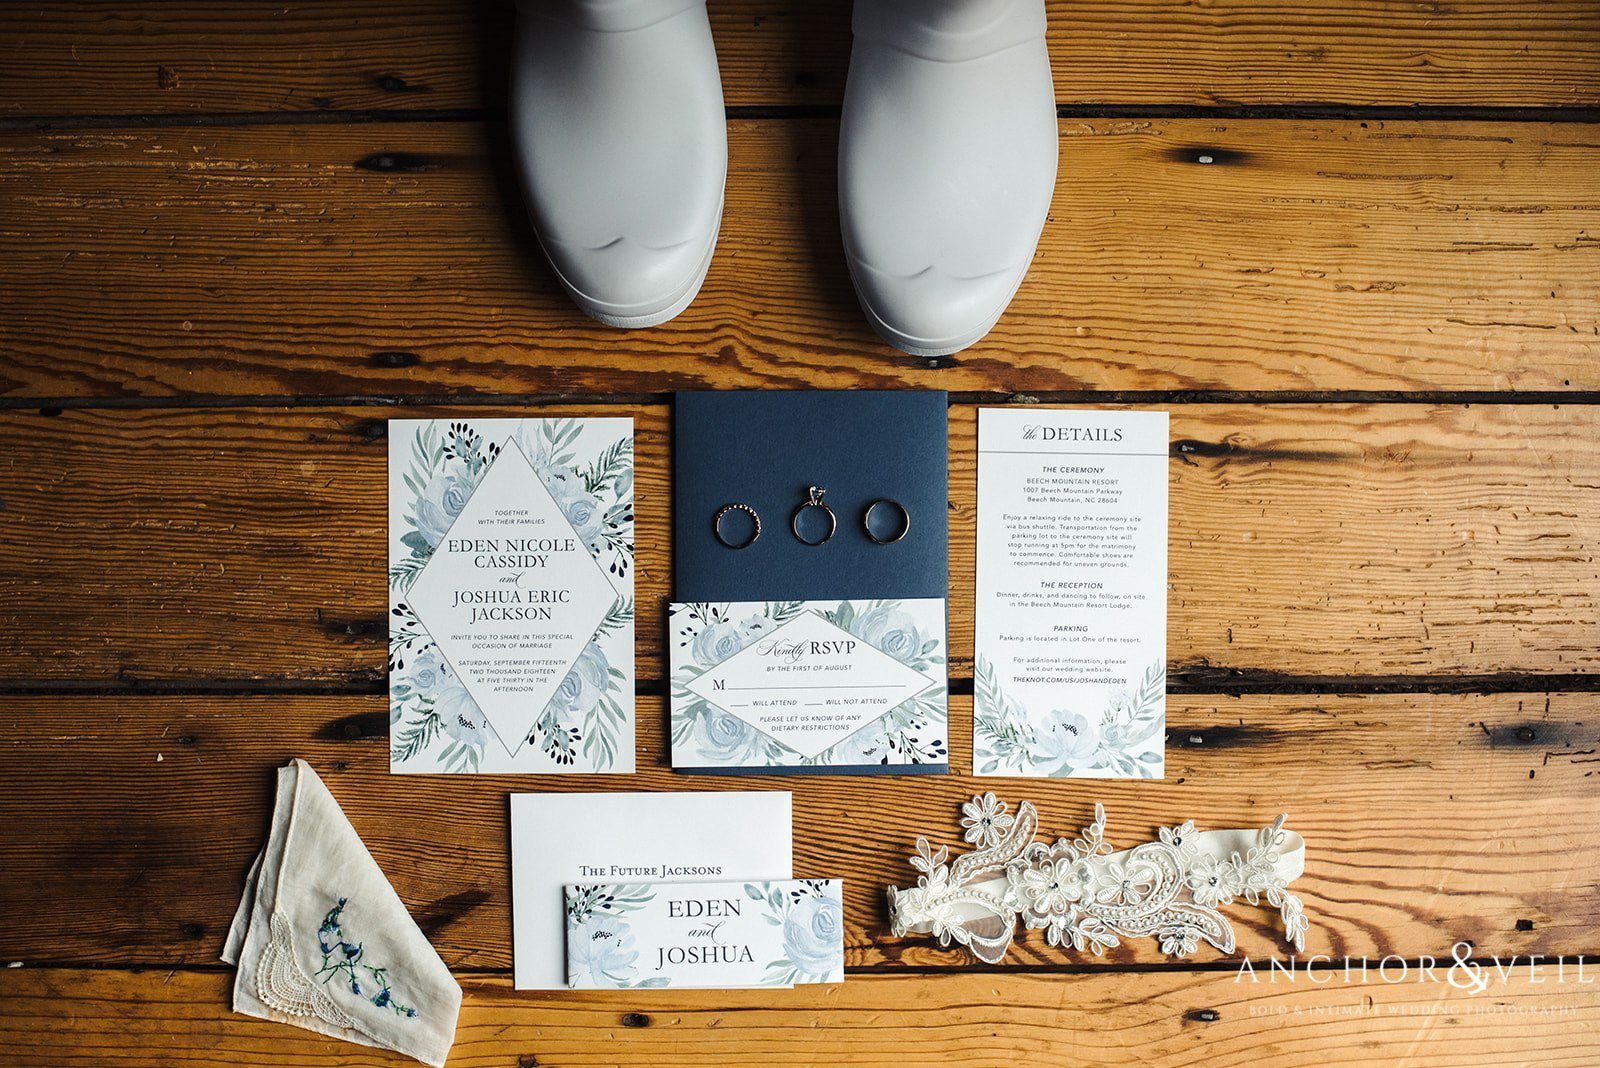 The Brides rainboots and stationary at the Beech Mountain Ski Resort Wedding